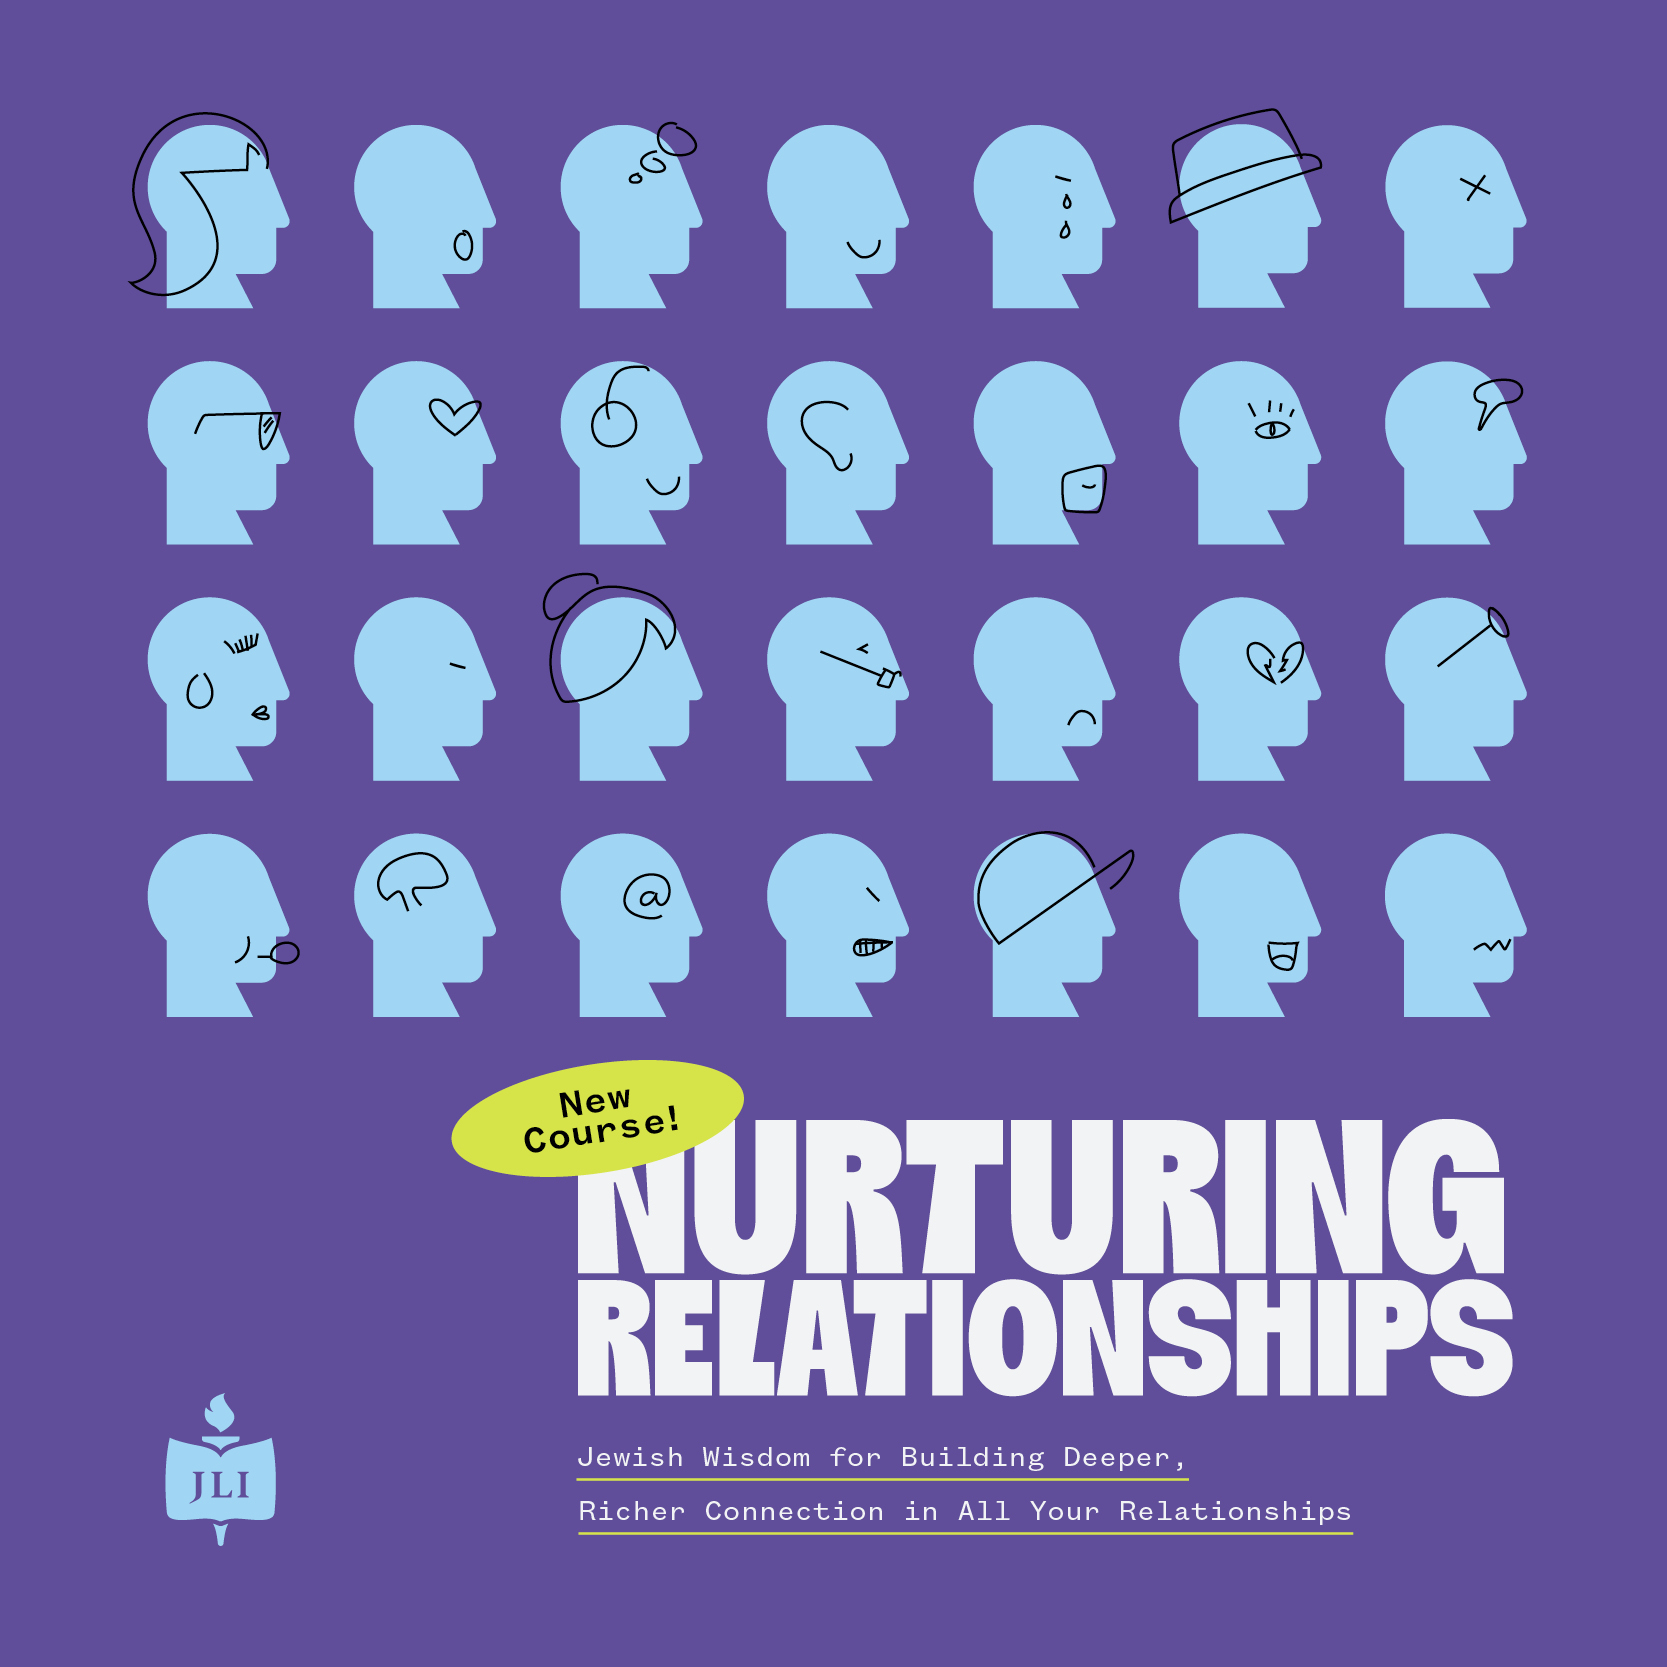 Nurturing Relationships: Jewish Wisdom for Building Deeper, Richer Connection in All Your Relationships